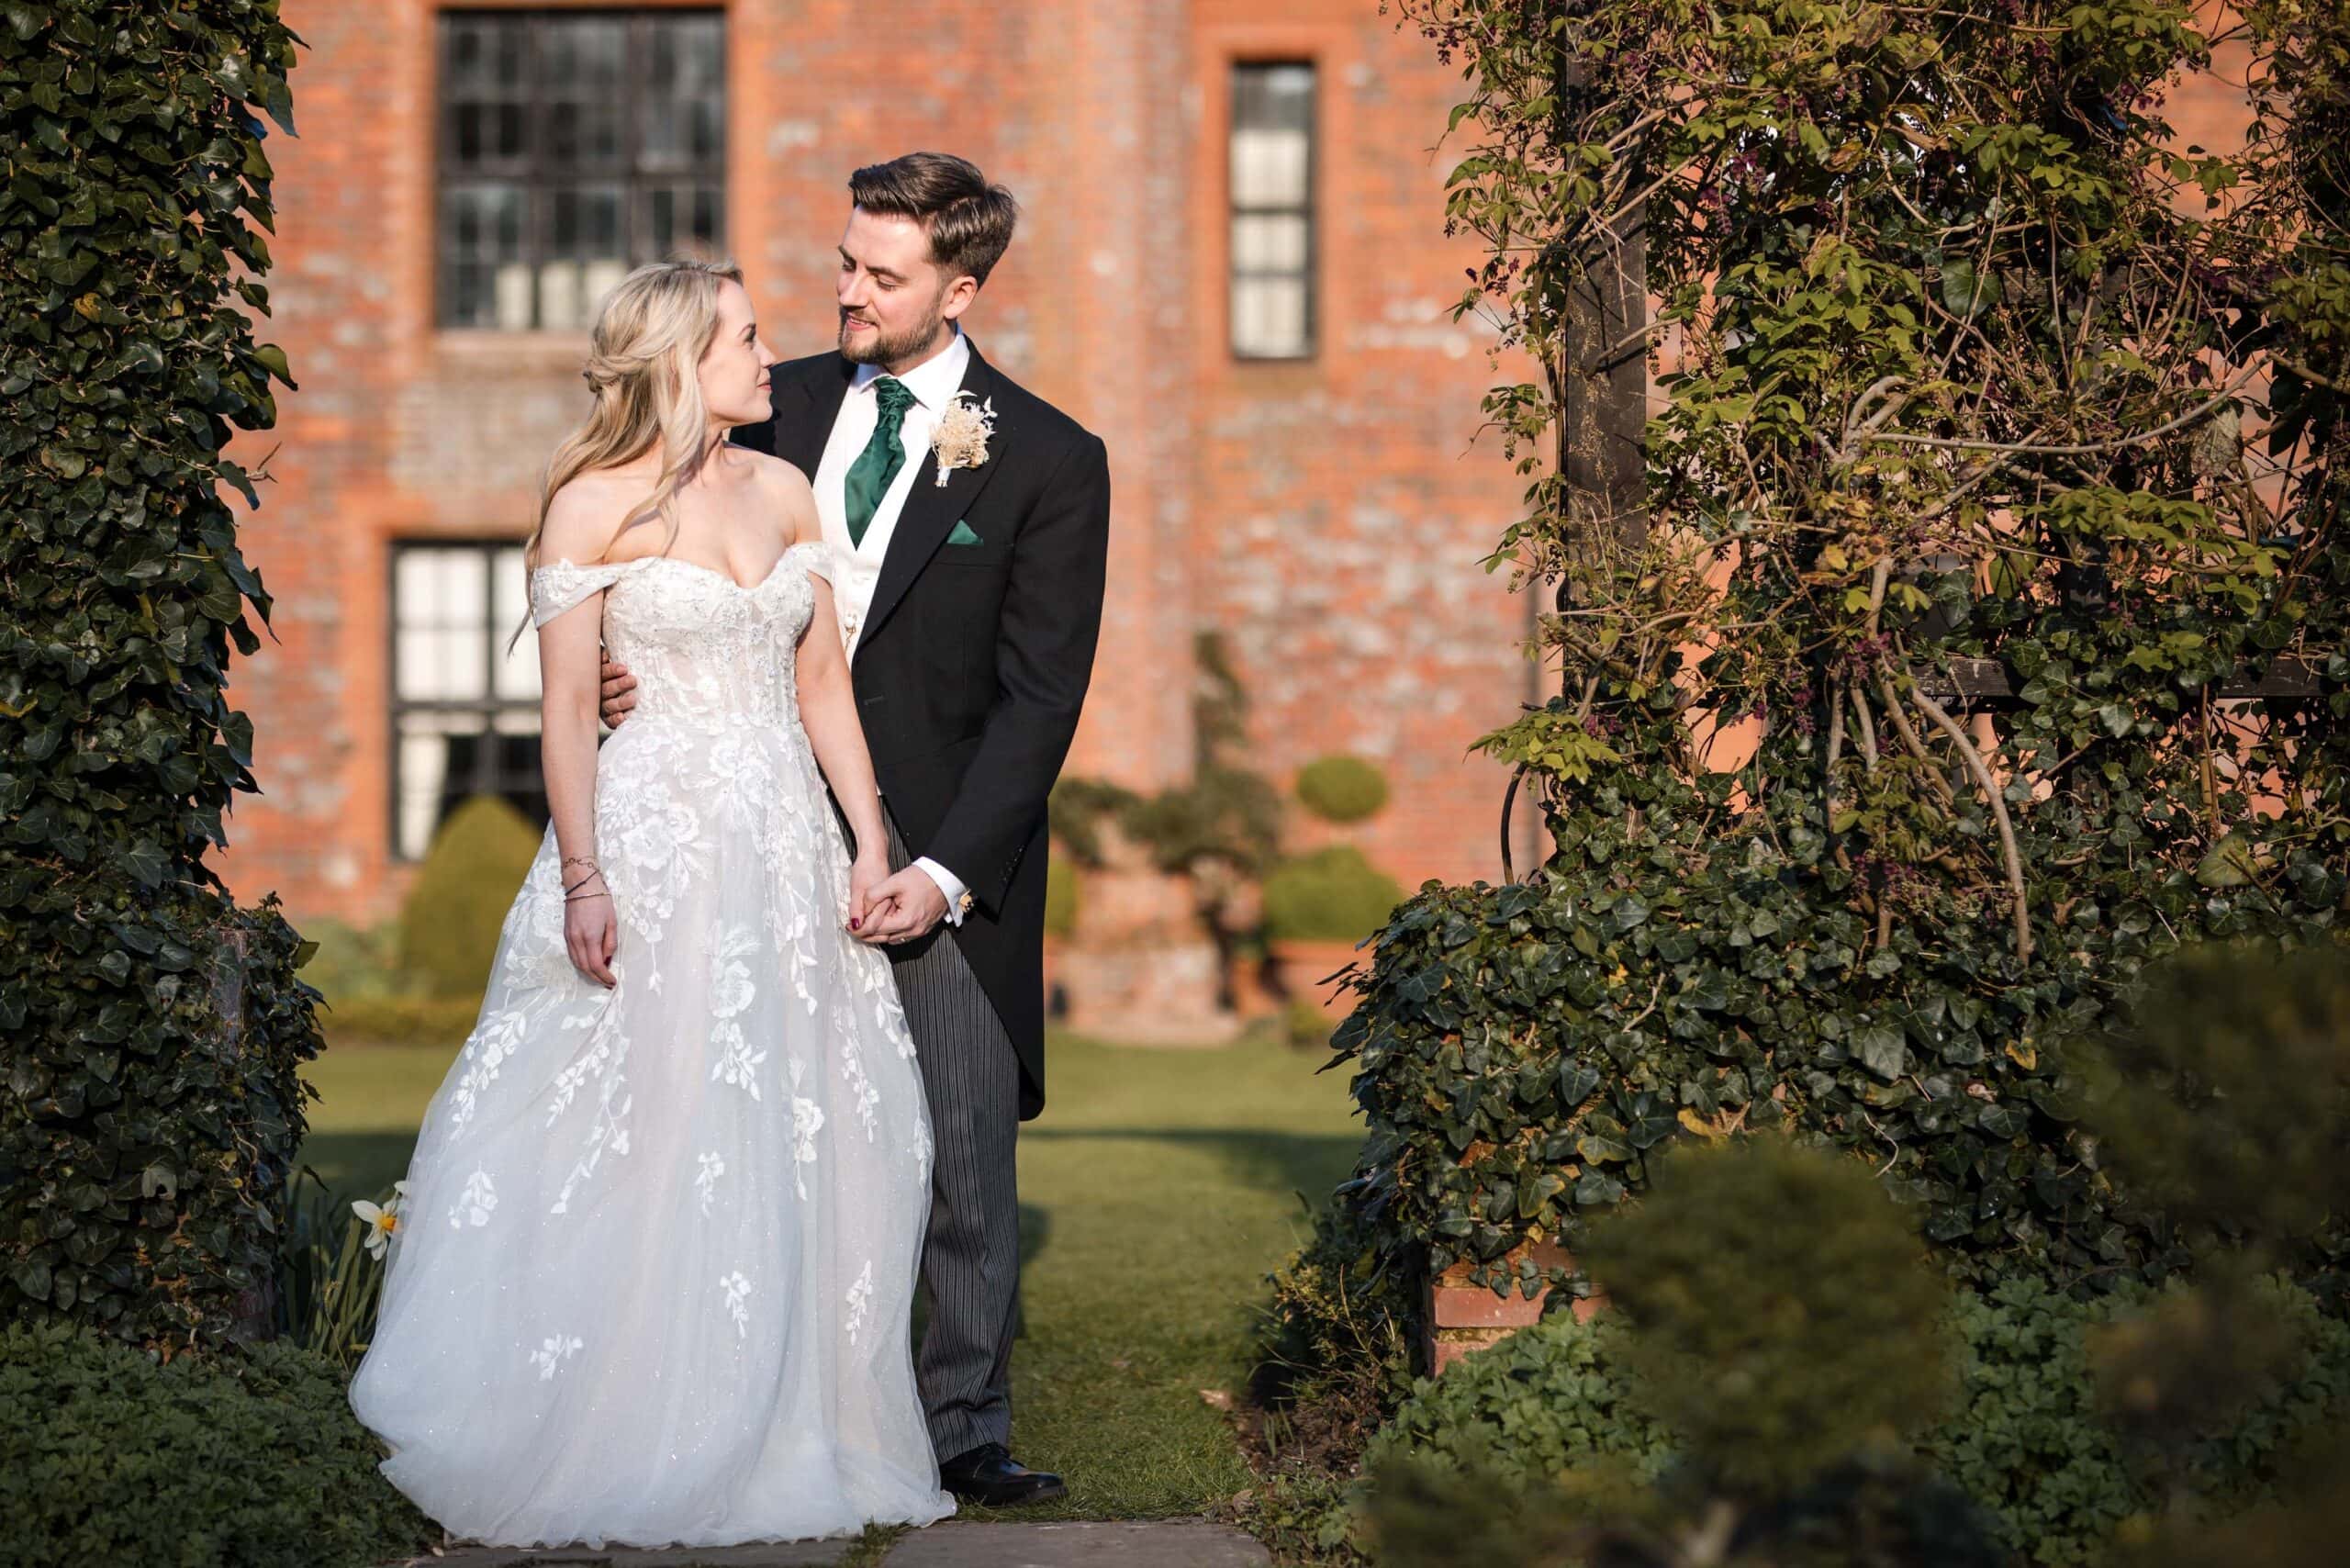 Bride and Groom photo at Chenies Manor Wedding